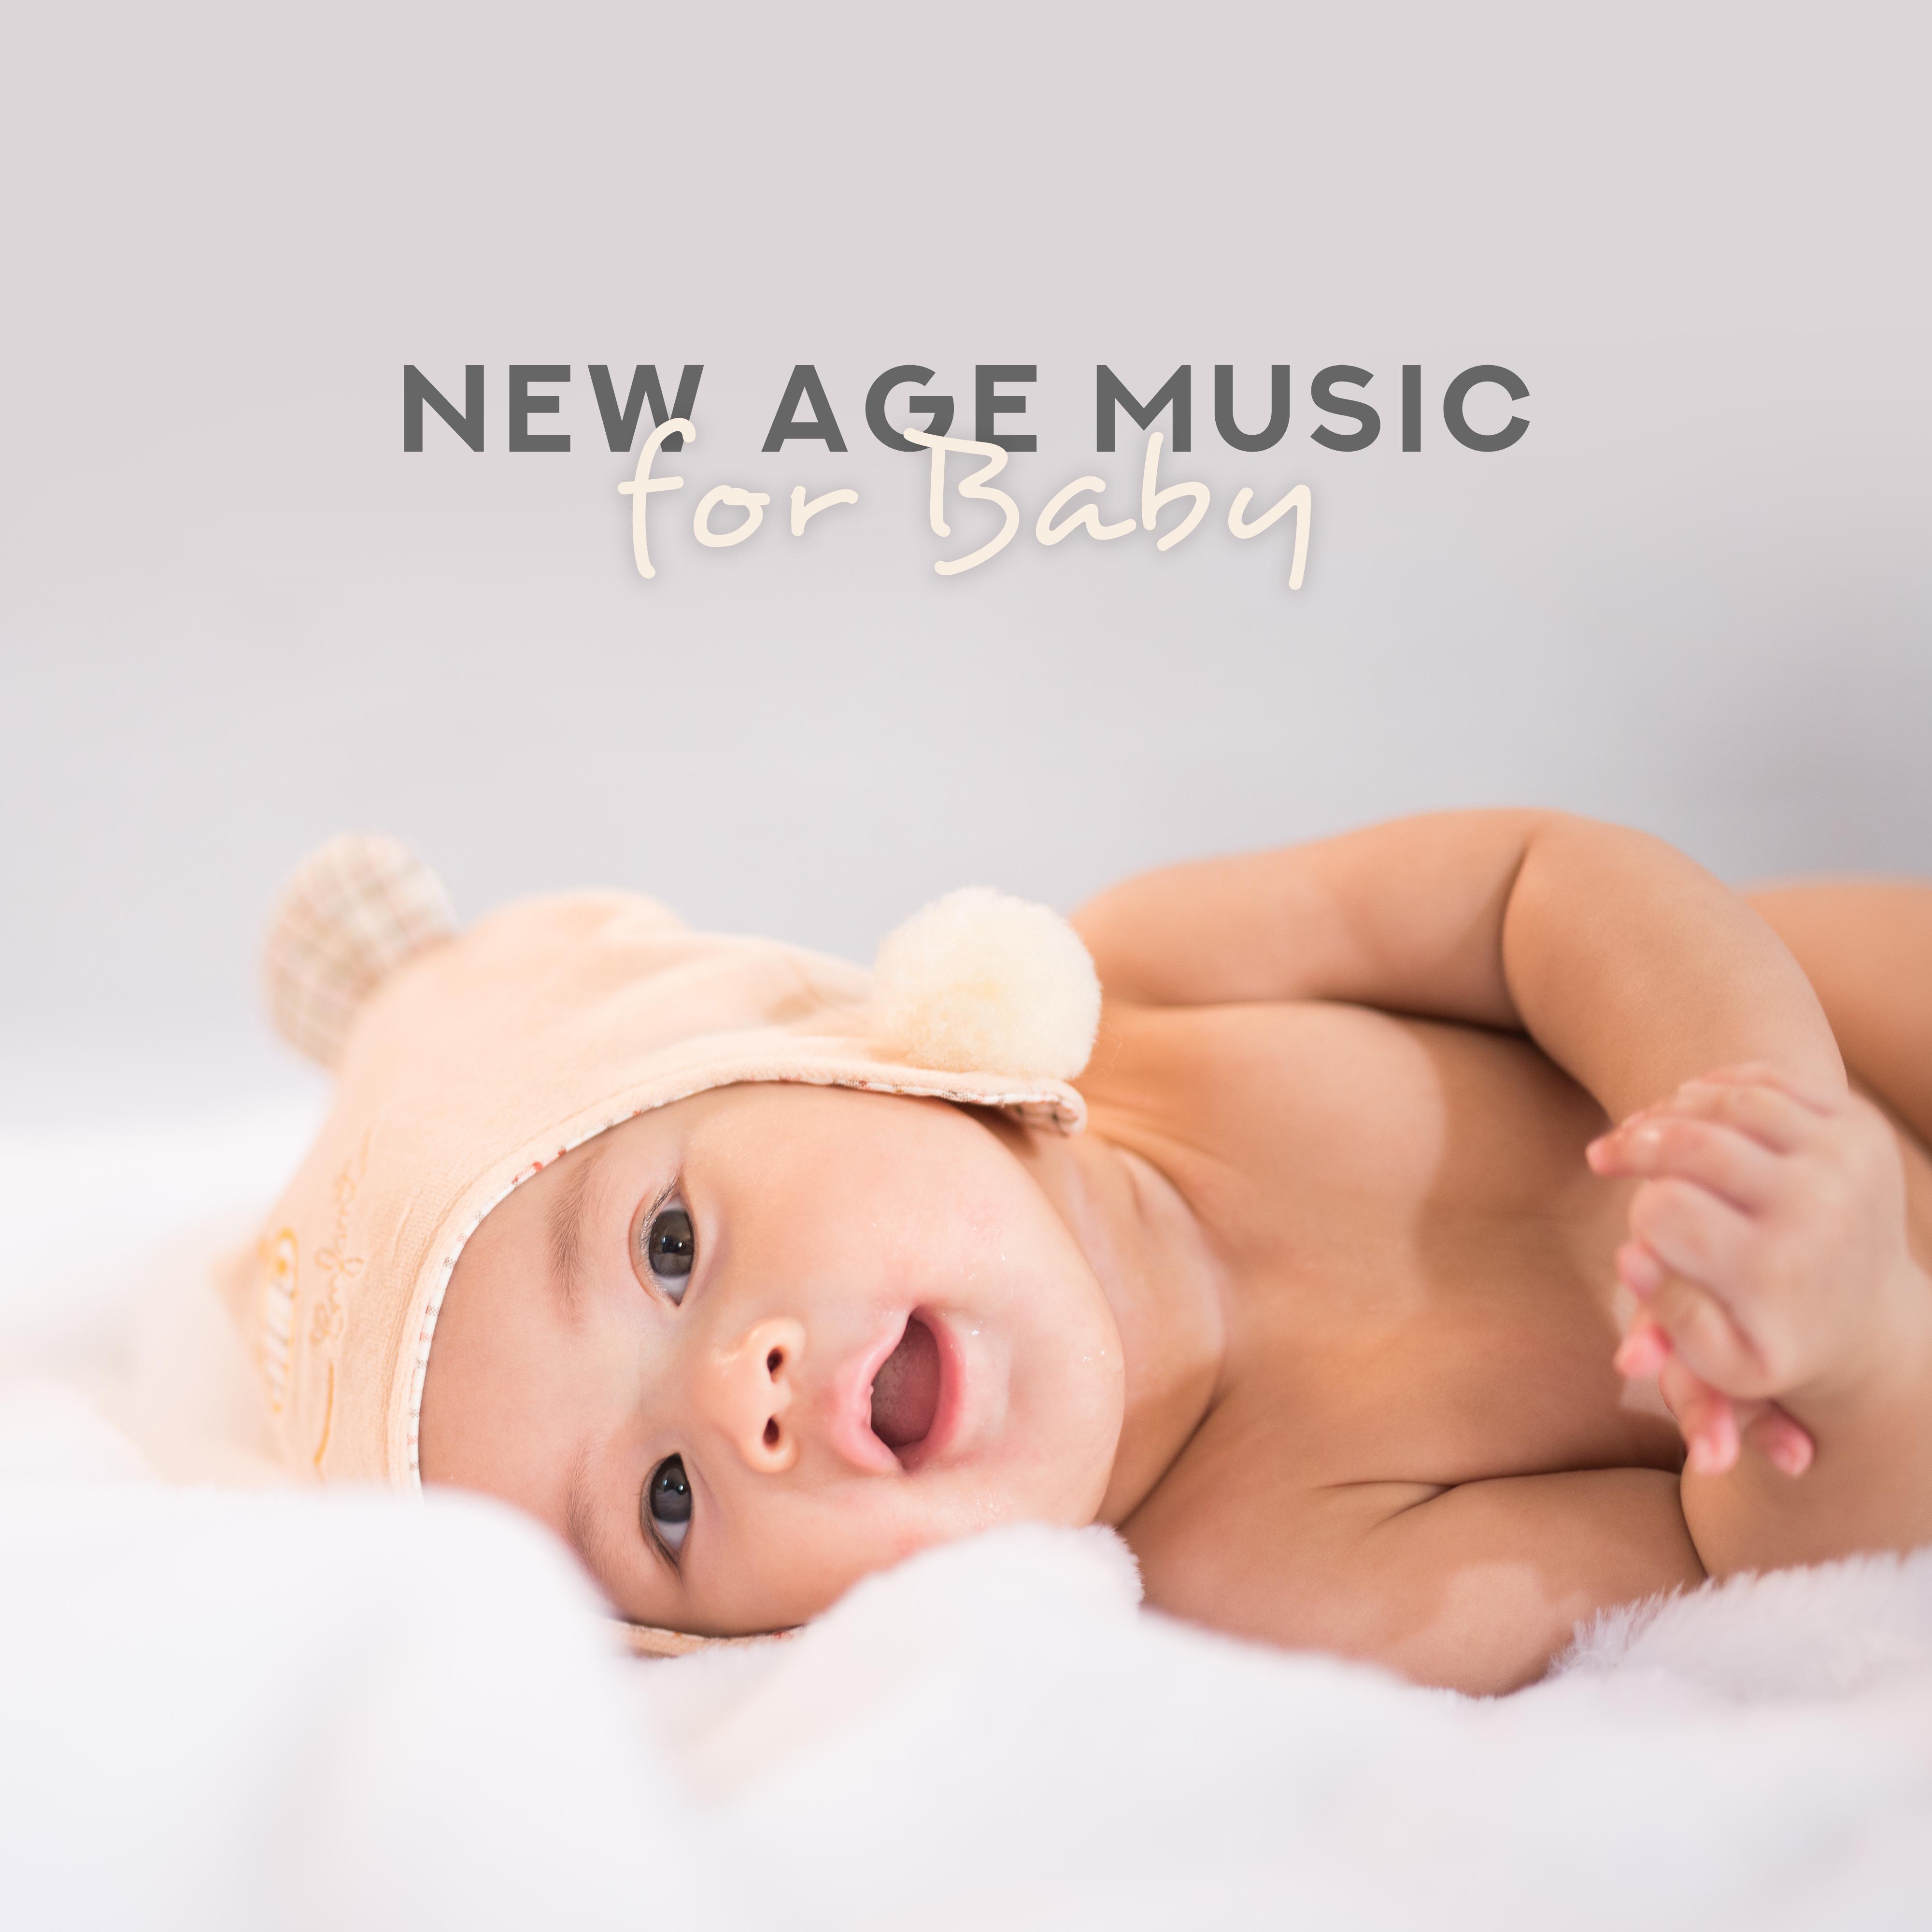 New Age Music for Baby – 15 Calming Sounds for Sleep, Cradle Songs, Relaxed Baby, Sweet Lullabies, Relaxing Sounds for Kids